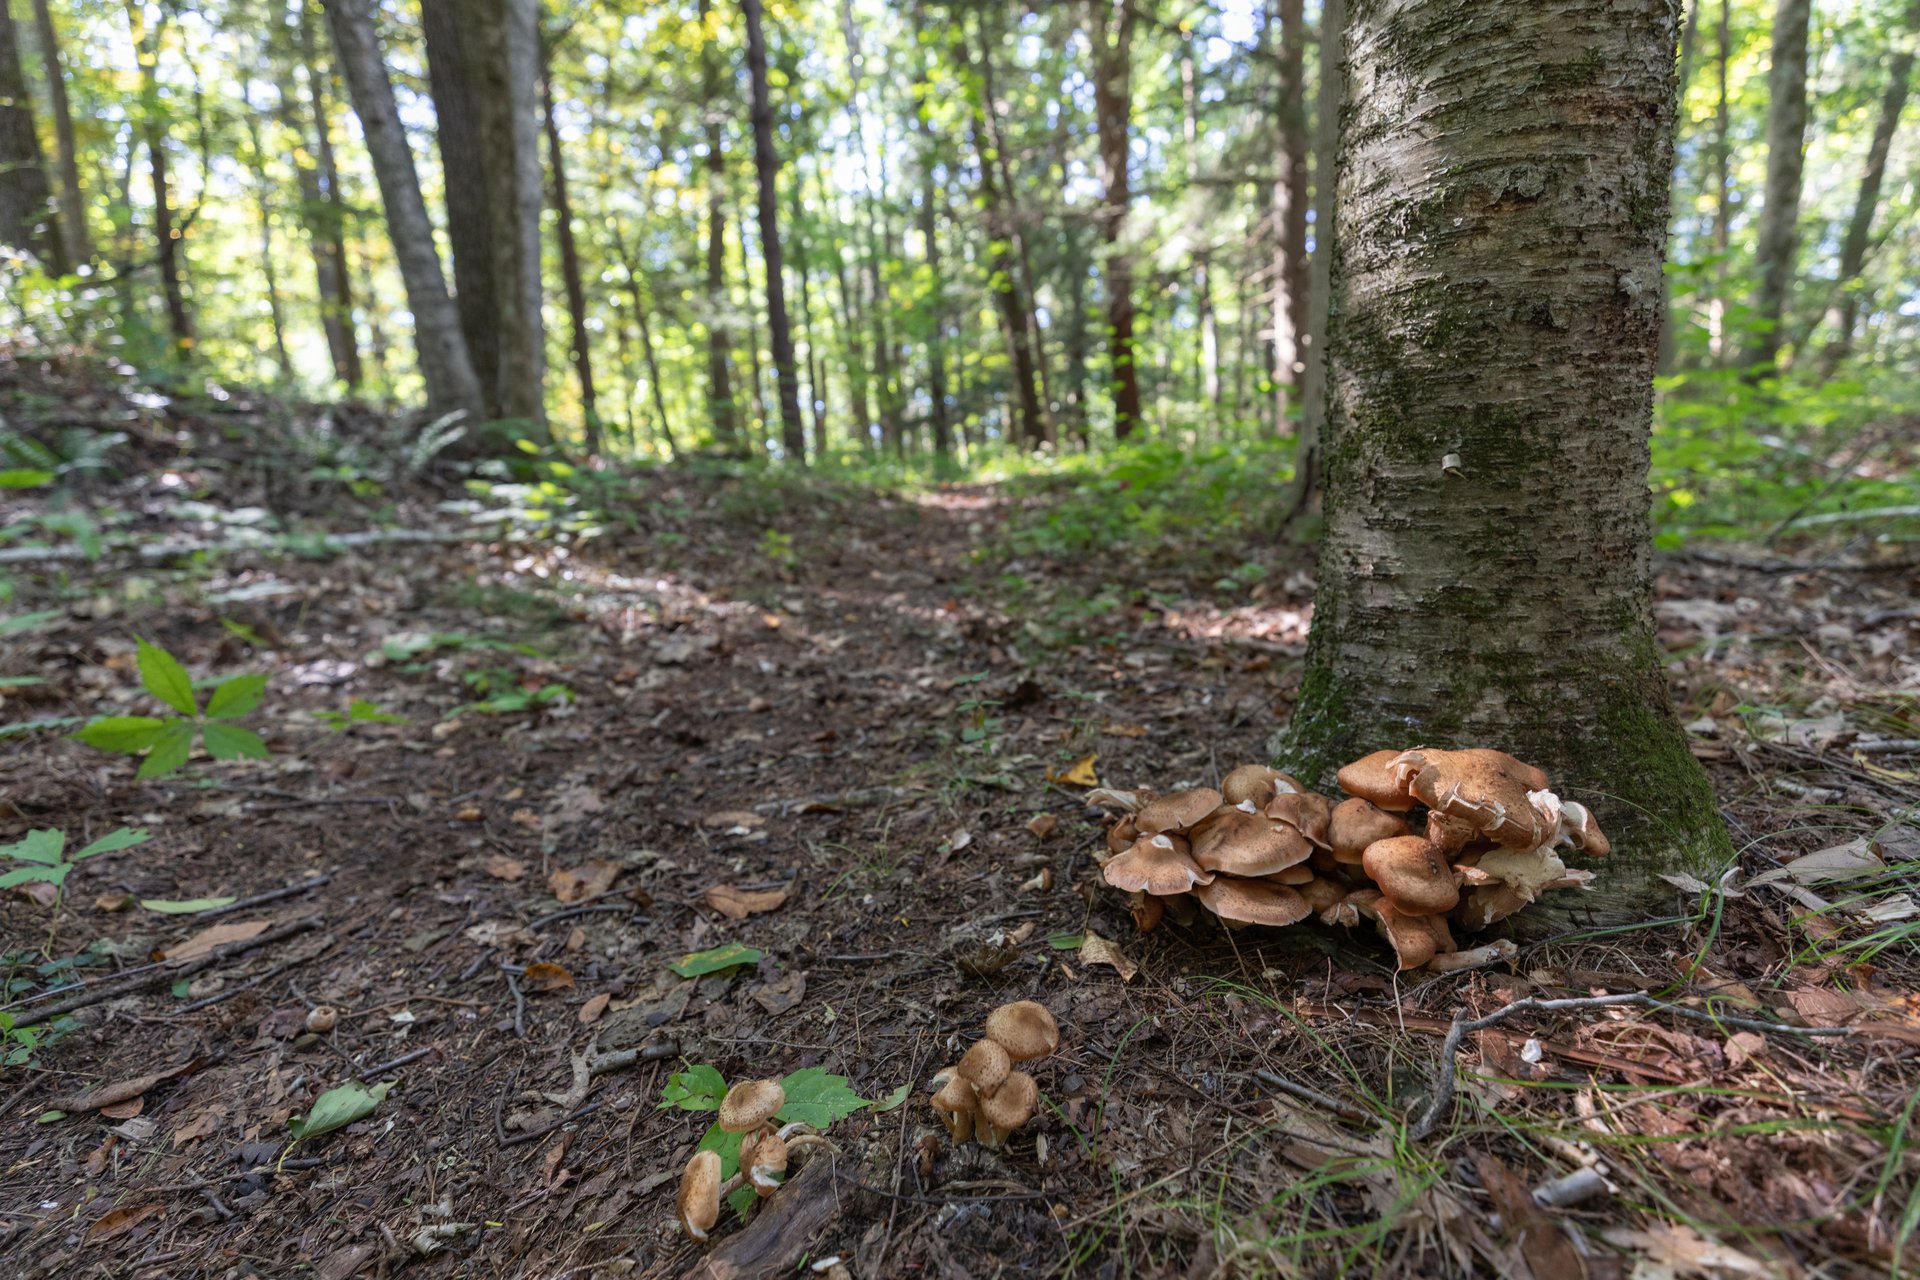 Cluster of small brown mushrooms at the bottom of a tree.